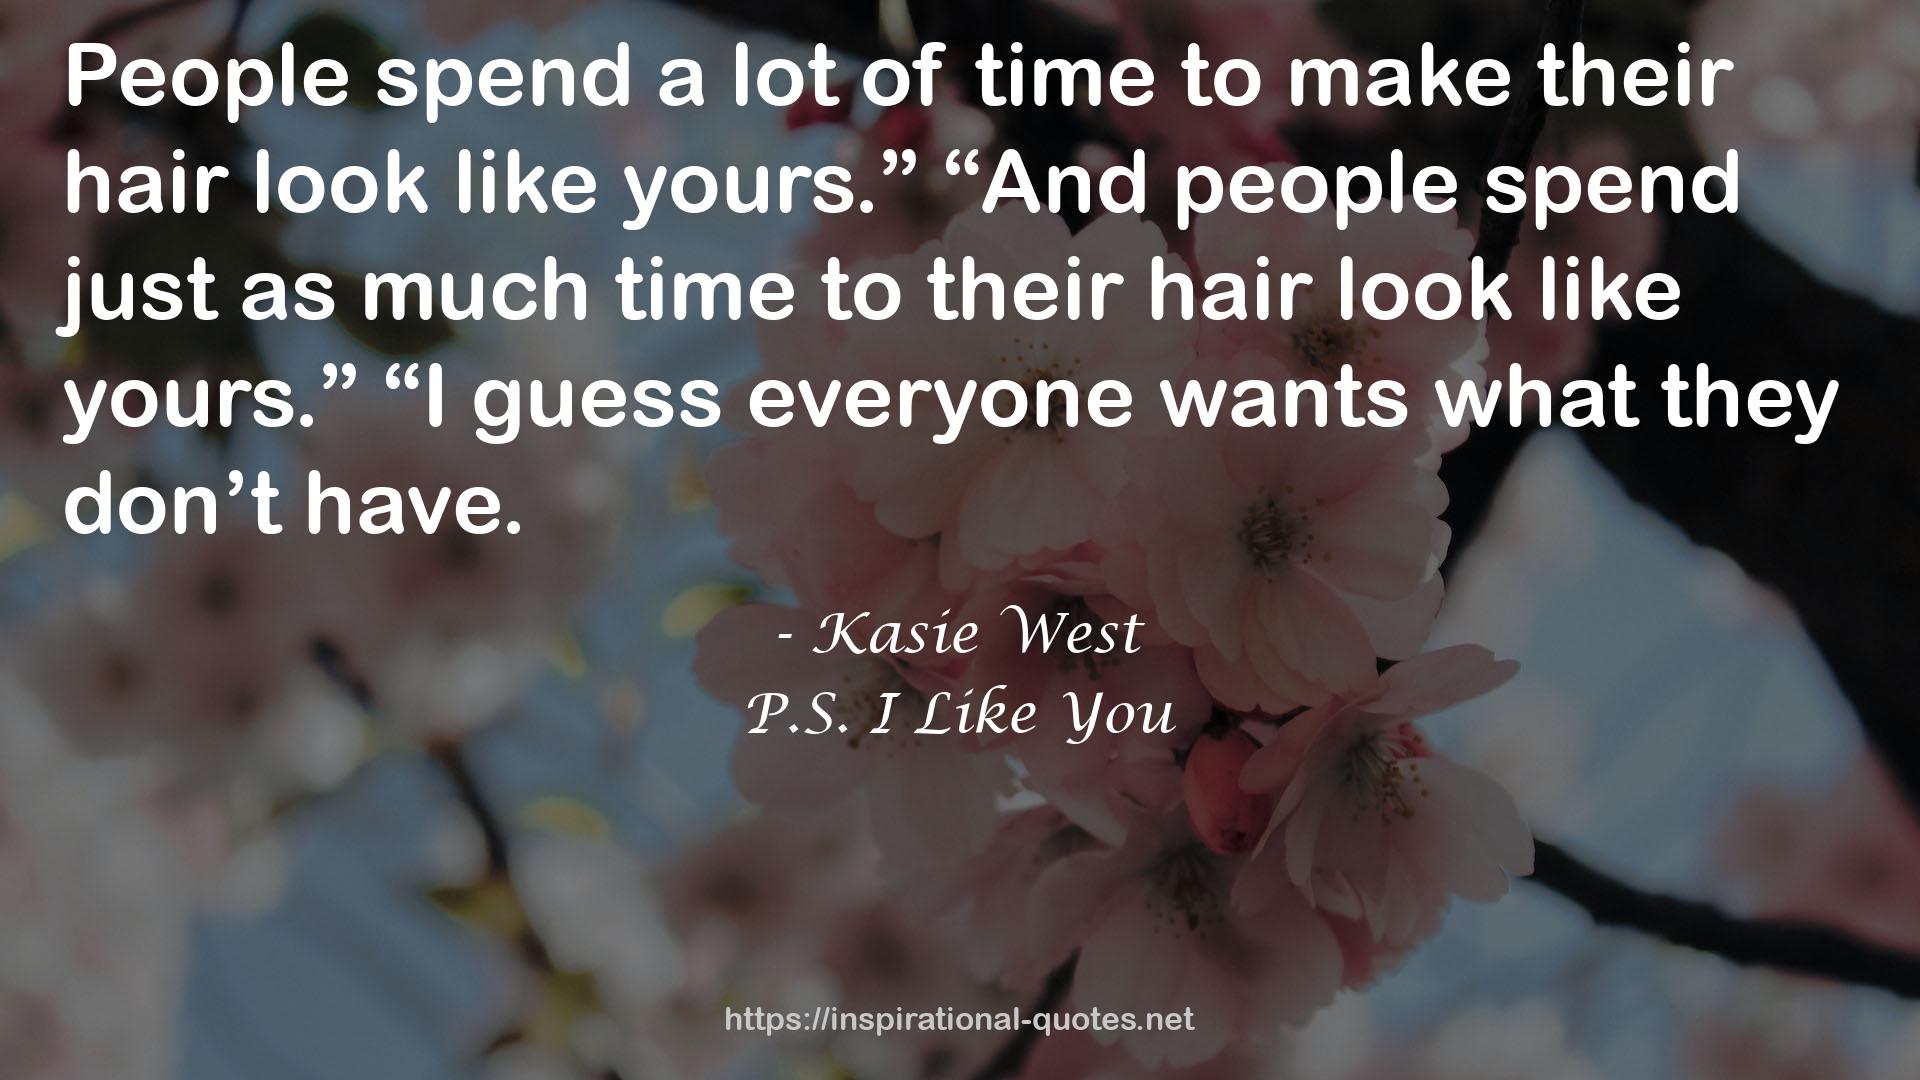 P.S. I Like You QUOTES